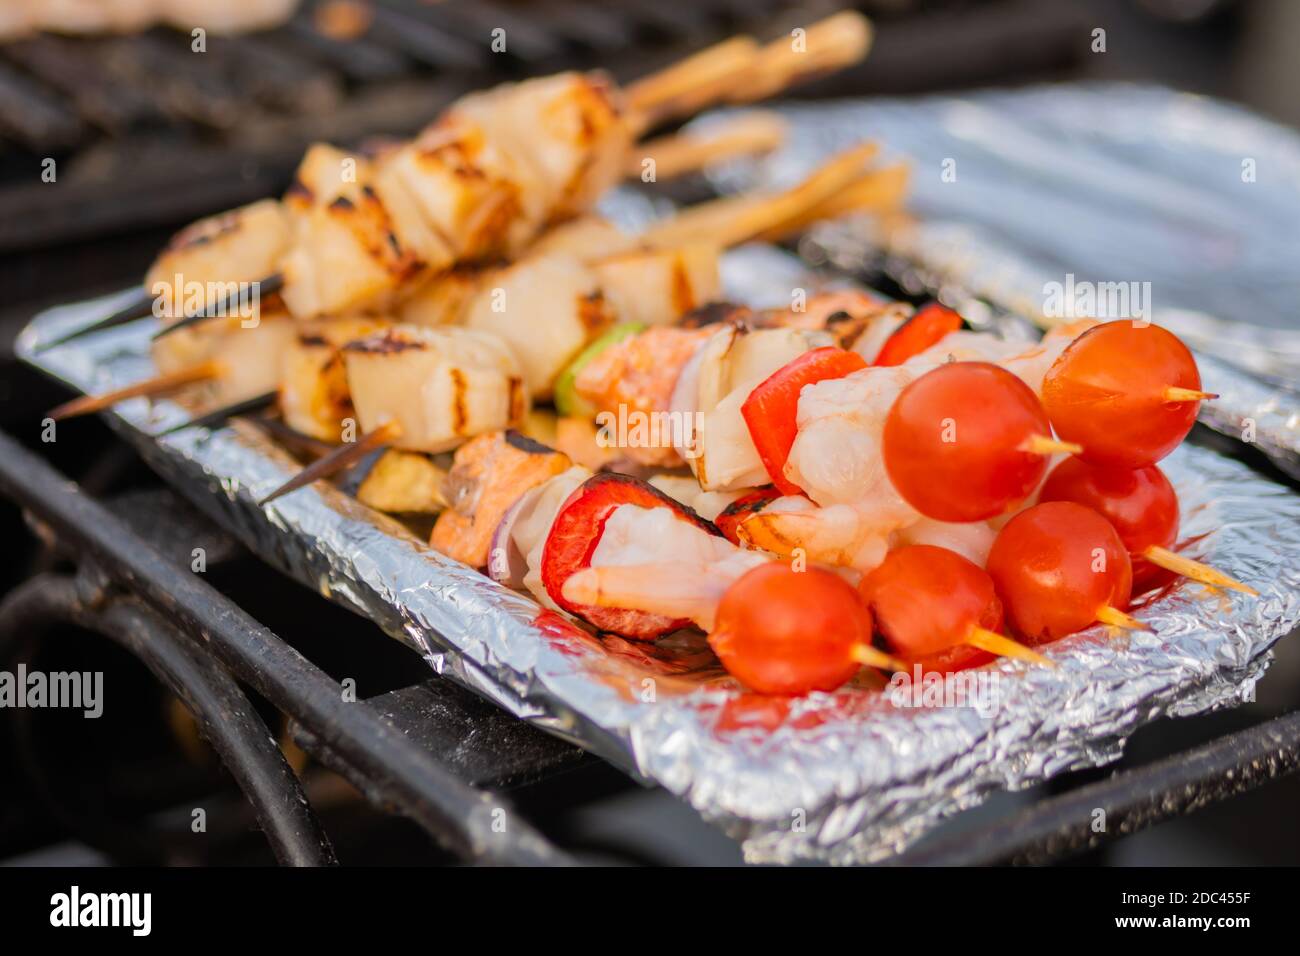 Cooked scallop and shrimp, prawn skewers, cherry tomato on foil - street food Stock Photo